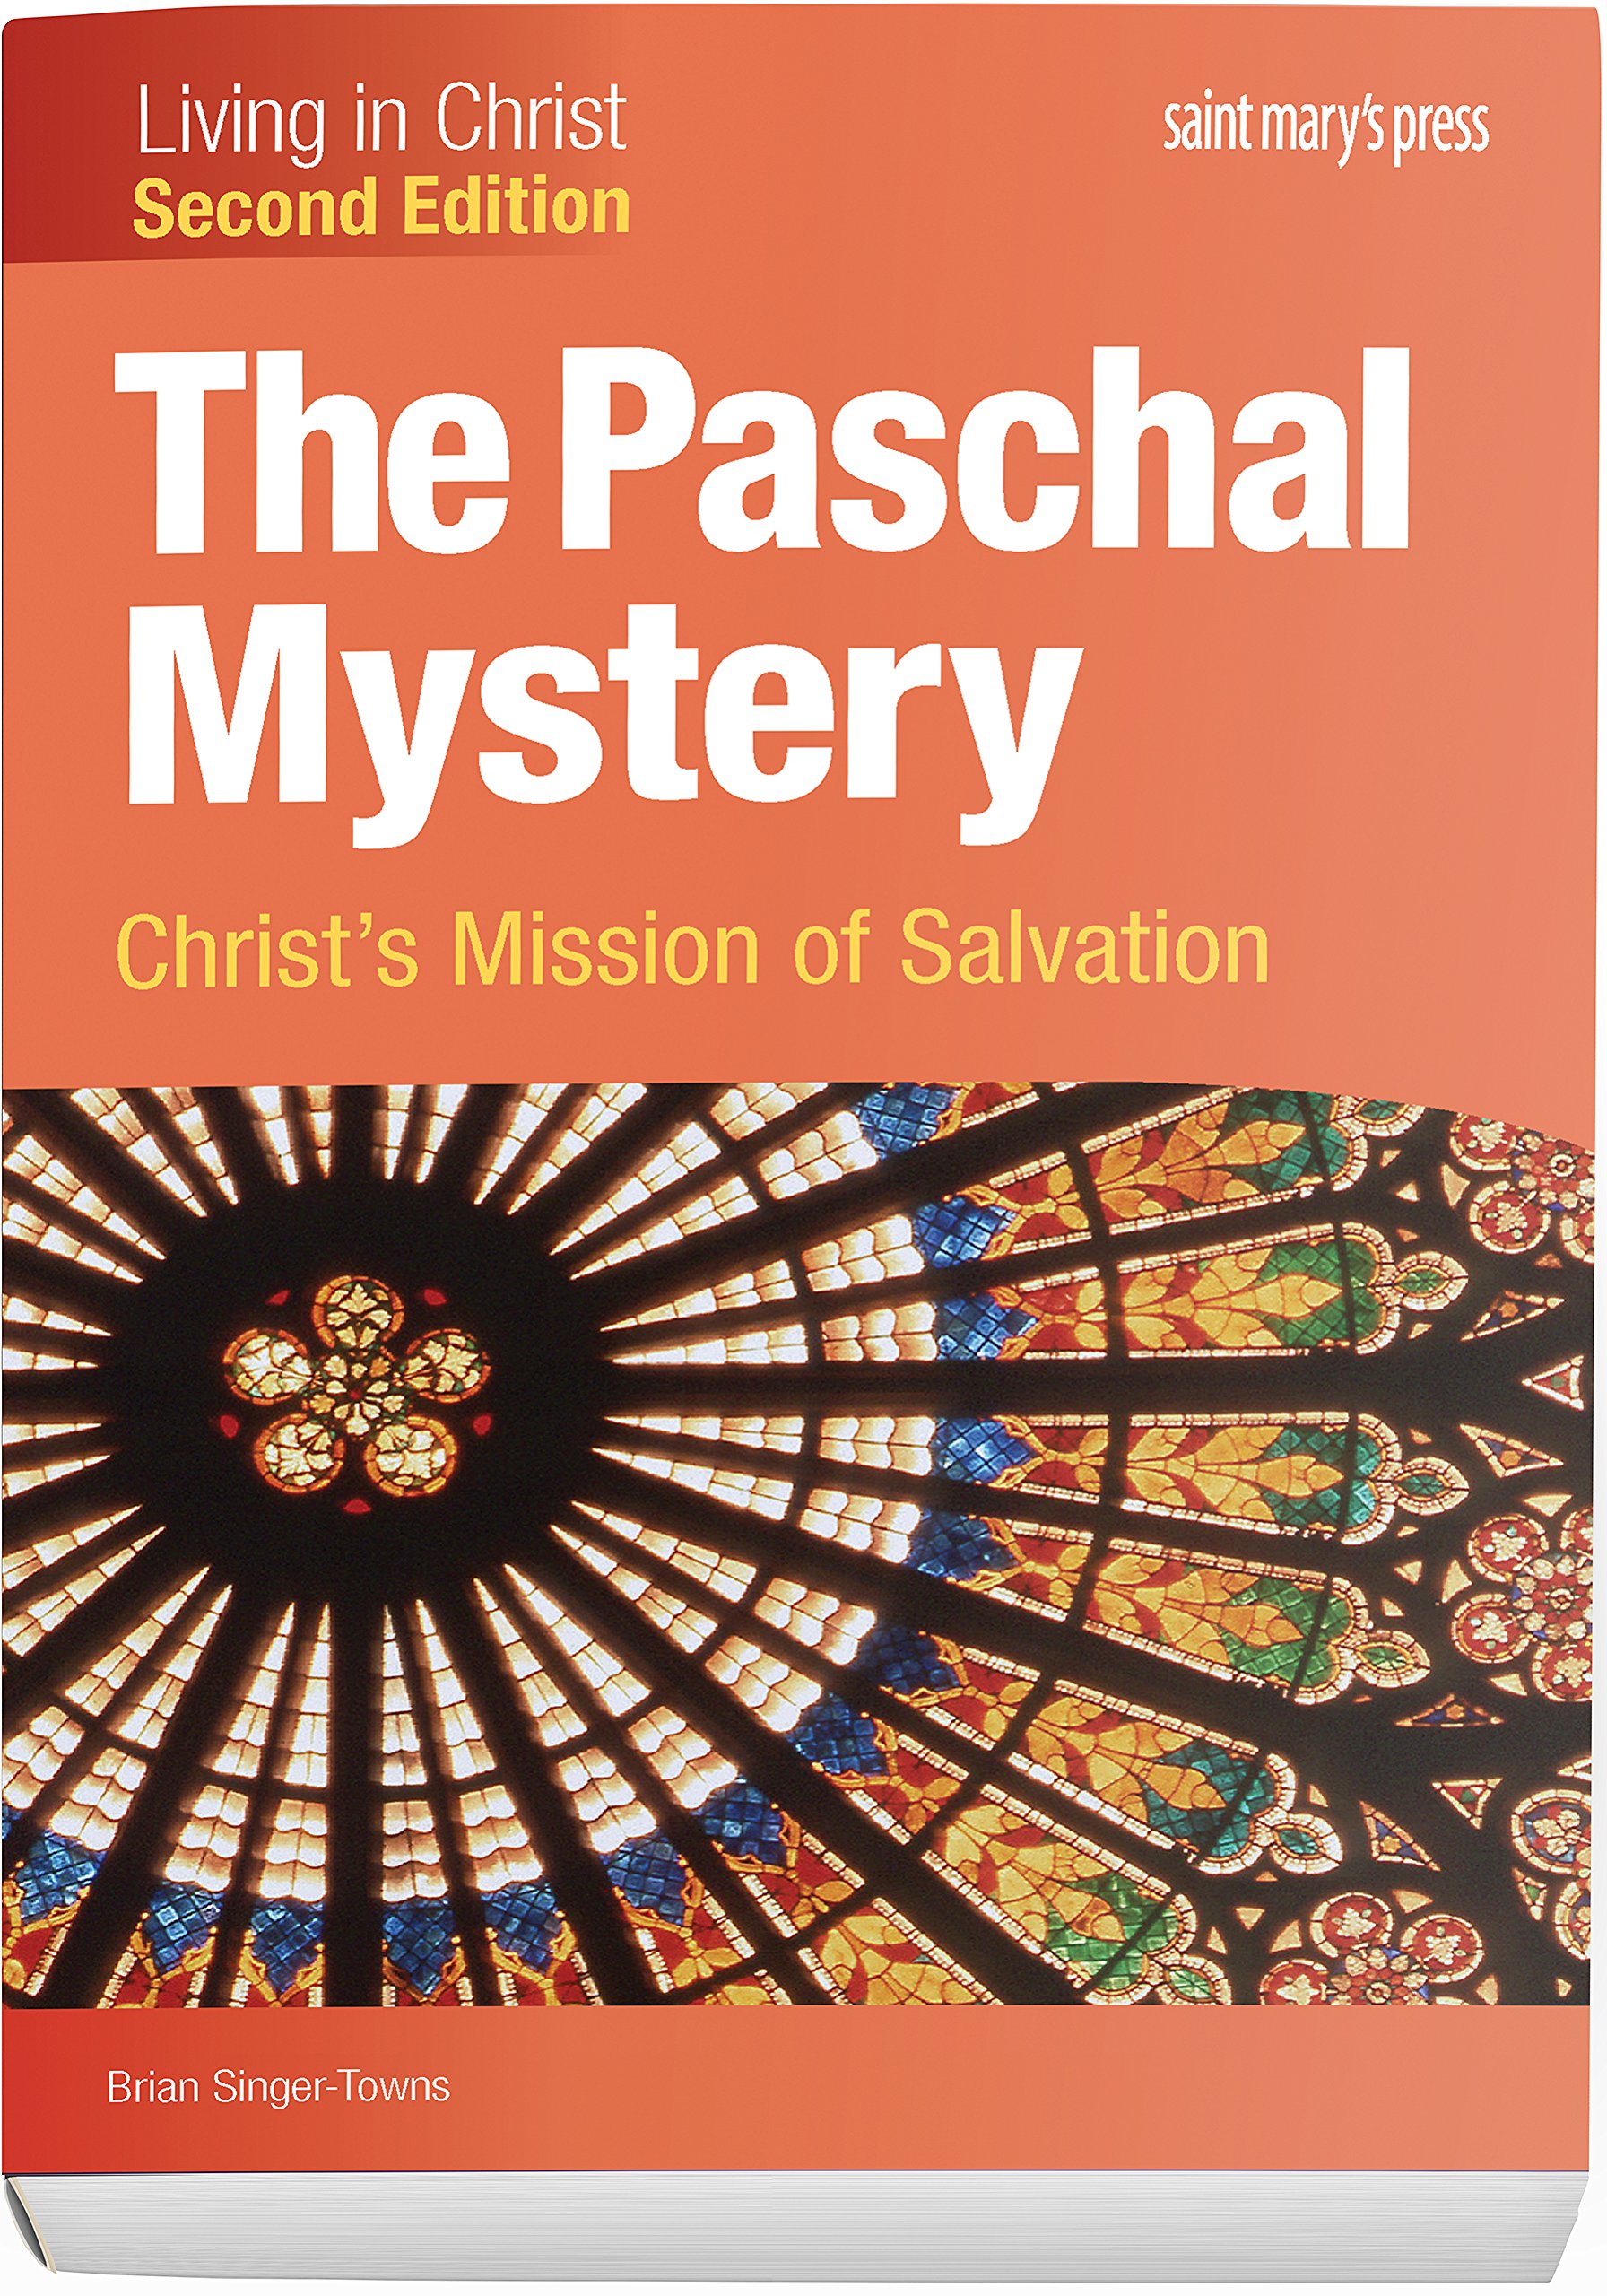 The Paschal Mystery: Christ's Mission of Salvation (Second Edition) Student Text (Living in Christ)